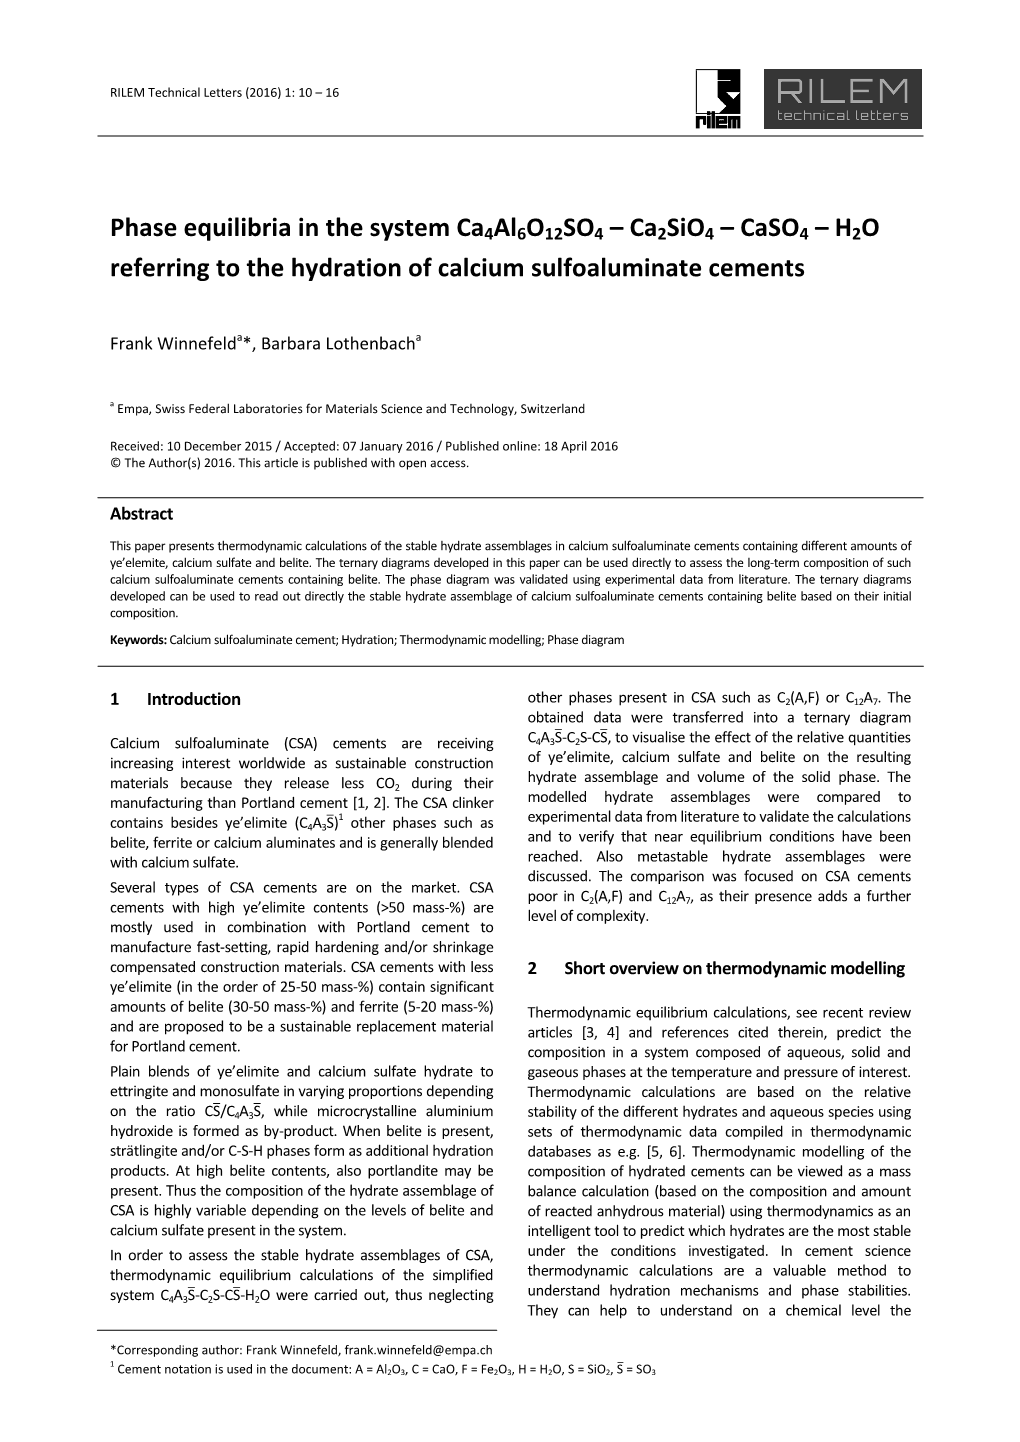 Caso4 – H2O Referring to the Hydration of Calcium Sulfoaluminate Cements